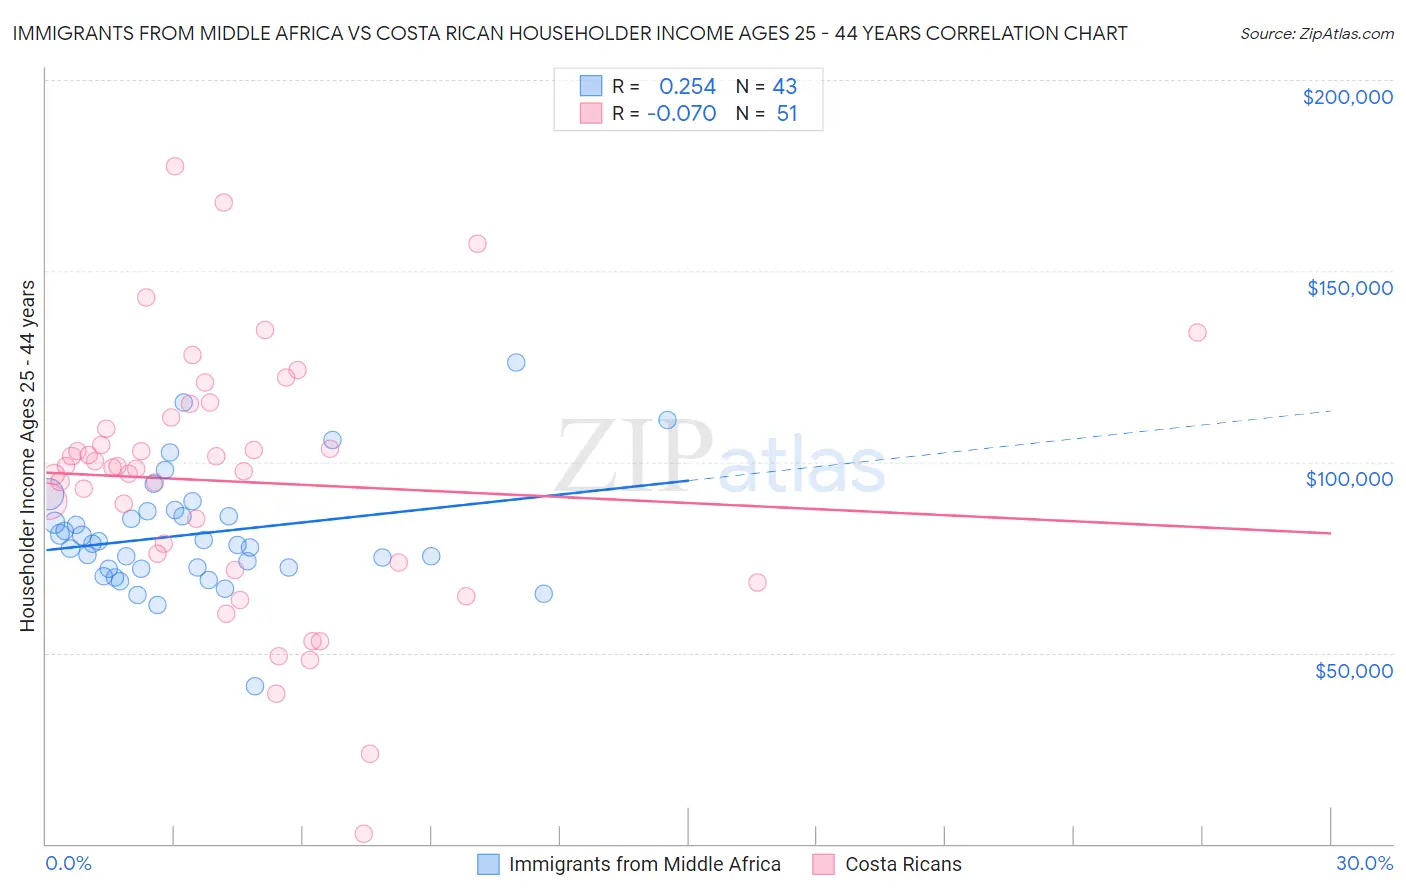 Immigrants from Middle Africa vs Costa Rican Householder Income Ages 25 - 44 years